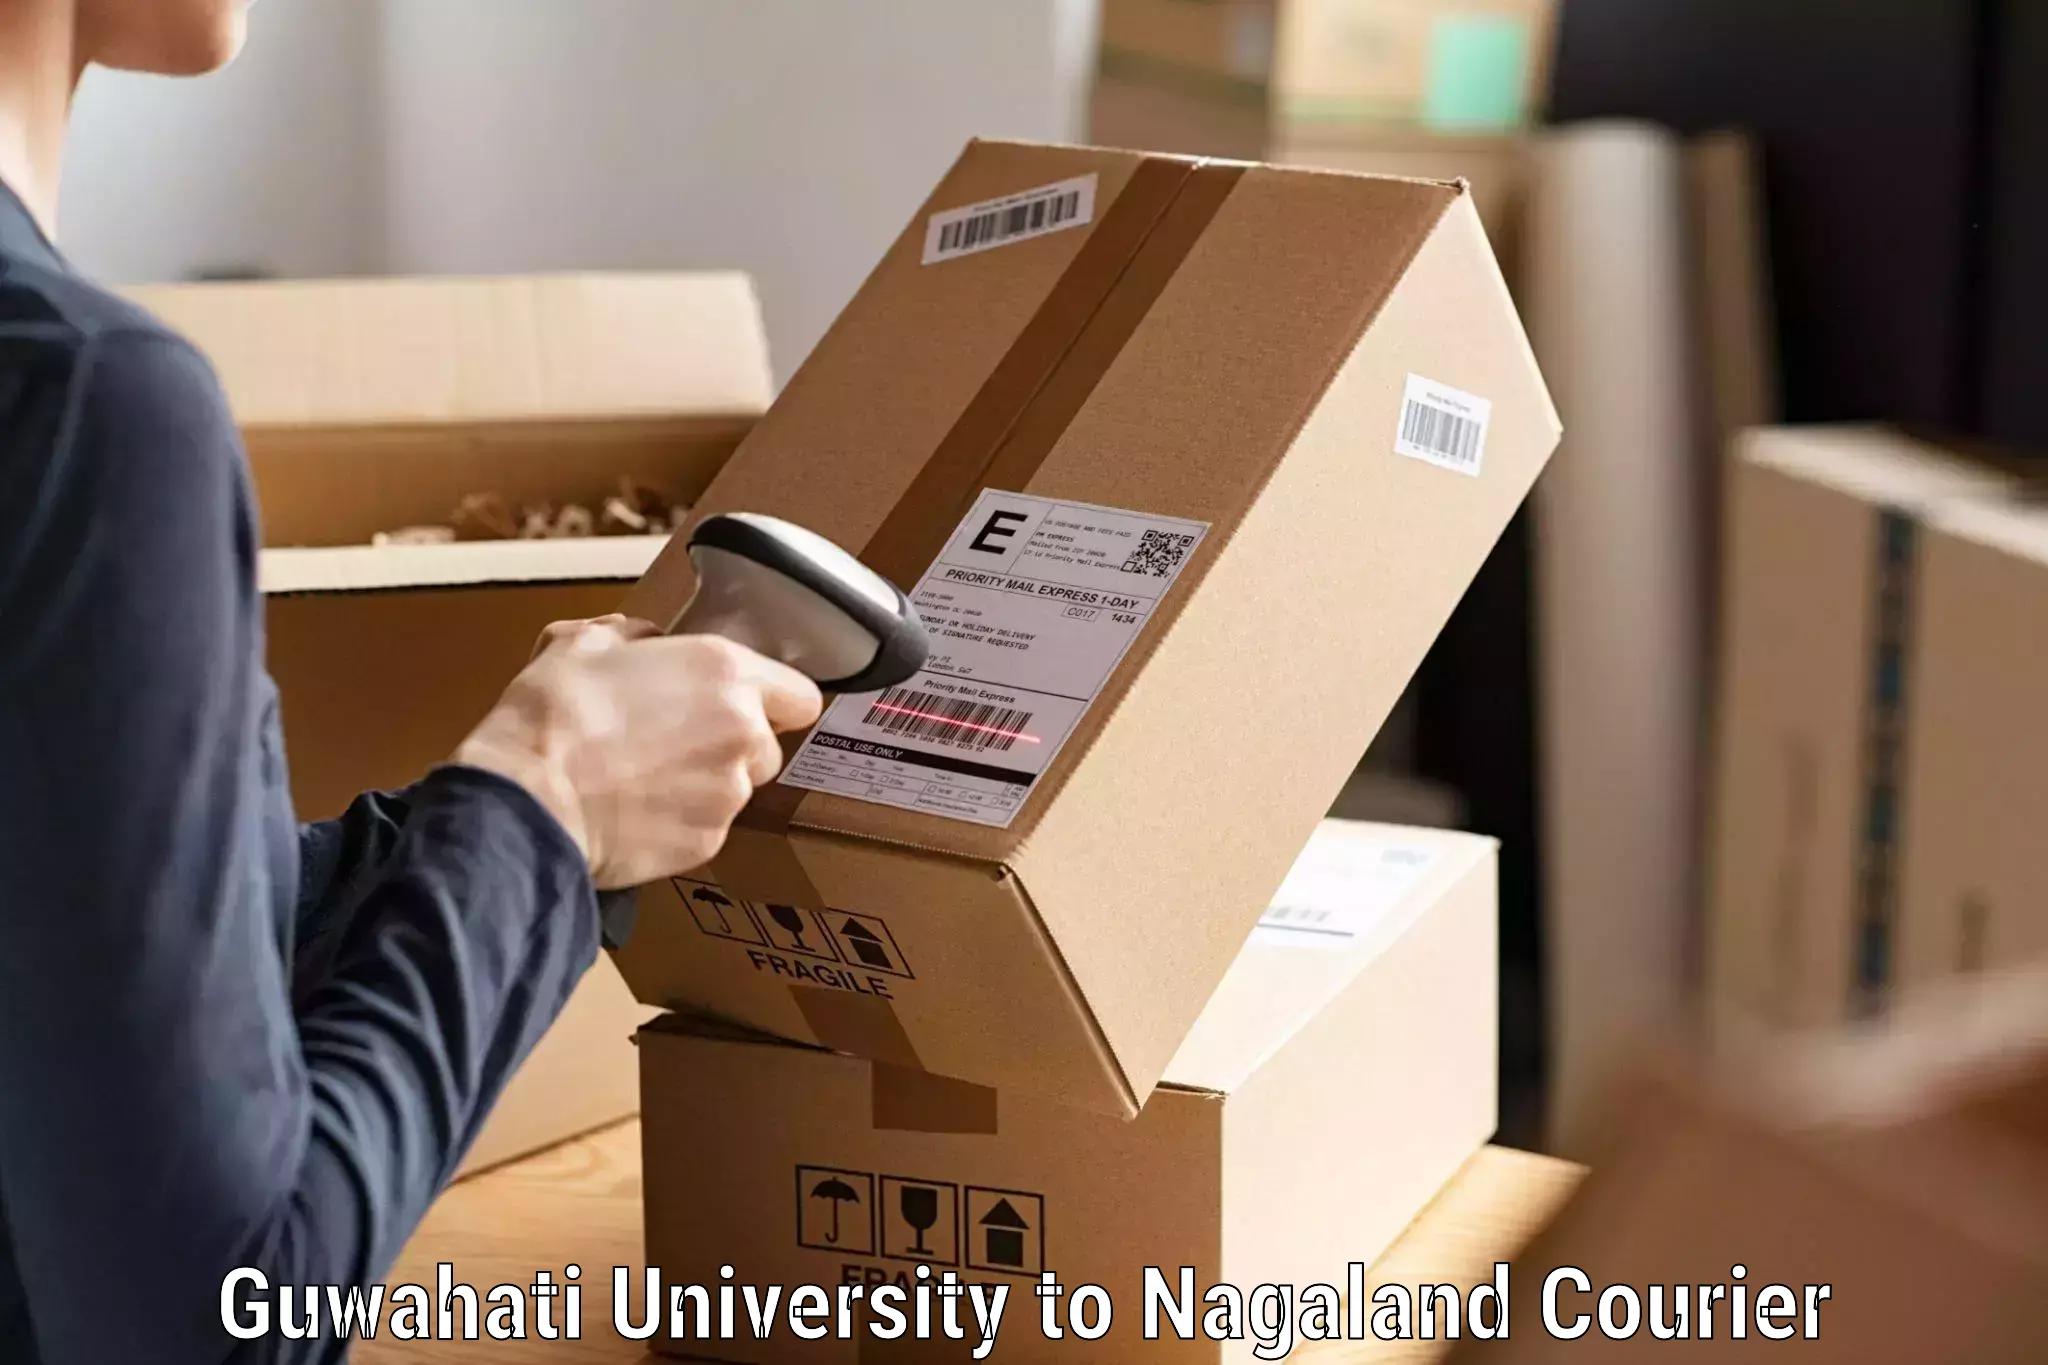 Courier tracking online Guwahati University to Nagaland